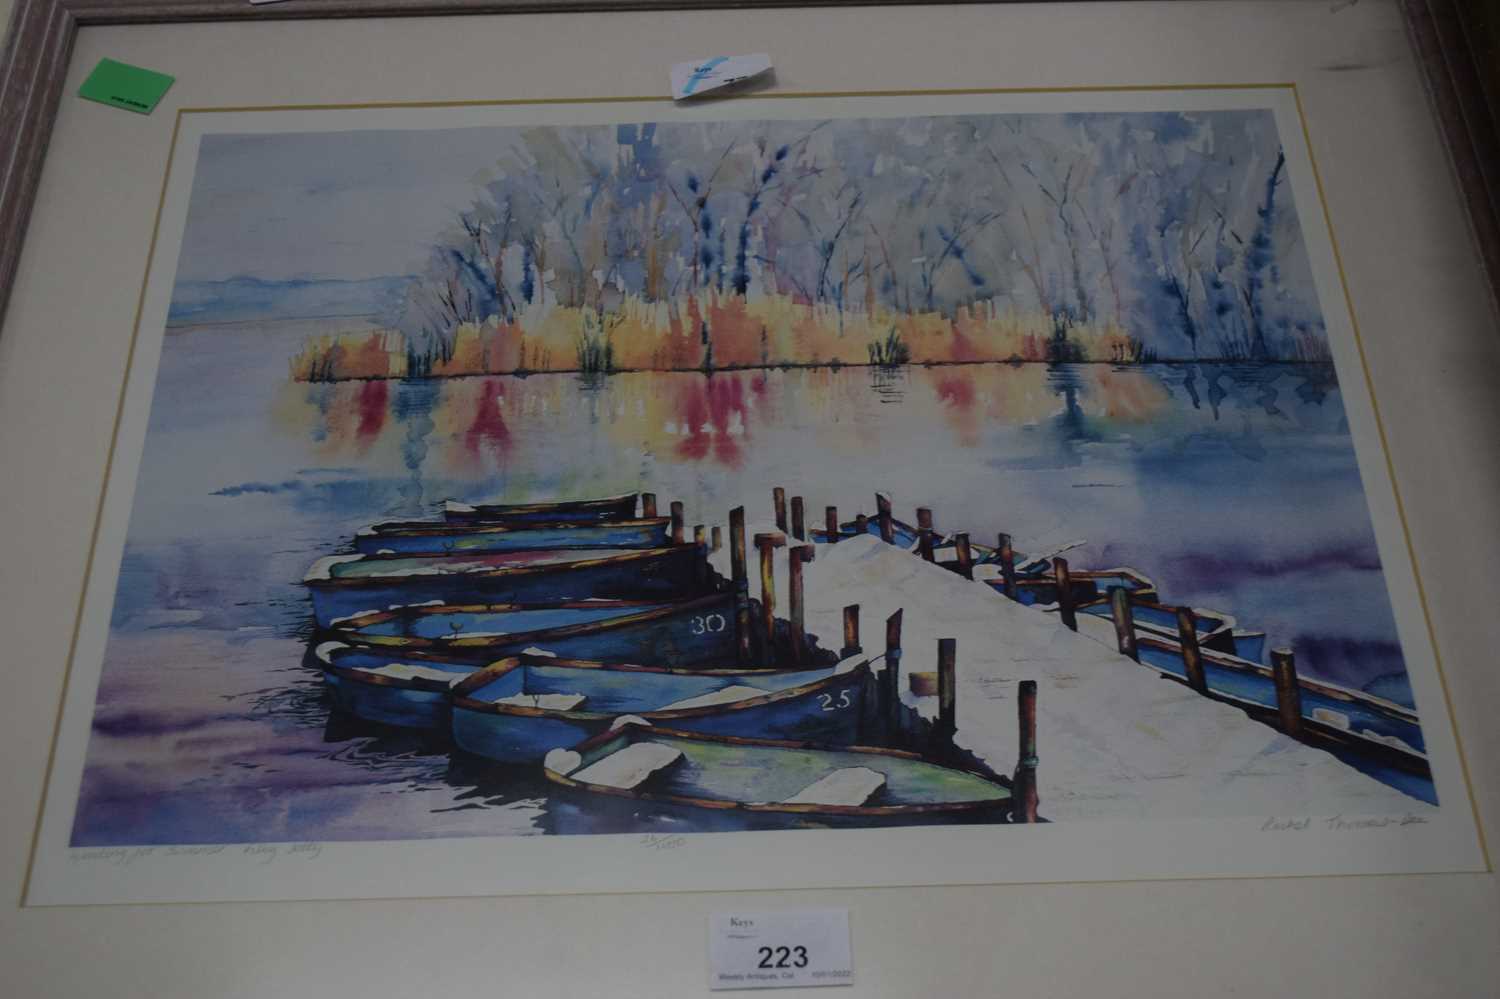 RACHEL THOMAS DEE, 'WAITING FOR SUMMER FILBY JETTY', LTD ED PRINT, SIGNED AND INSCRIBED 20/1000,